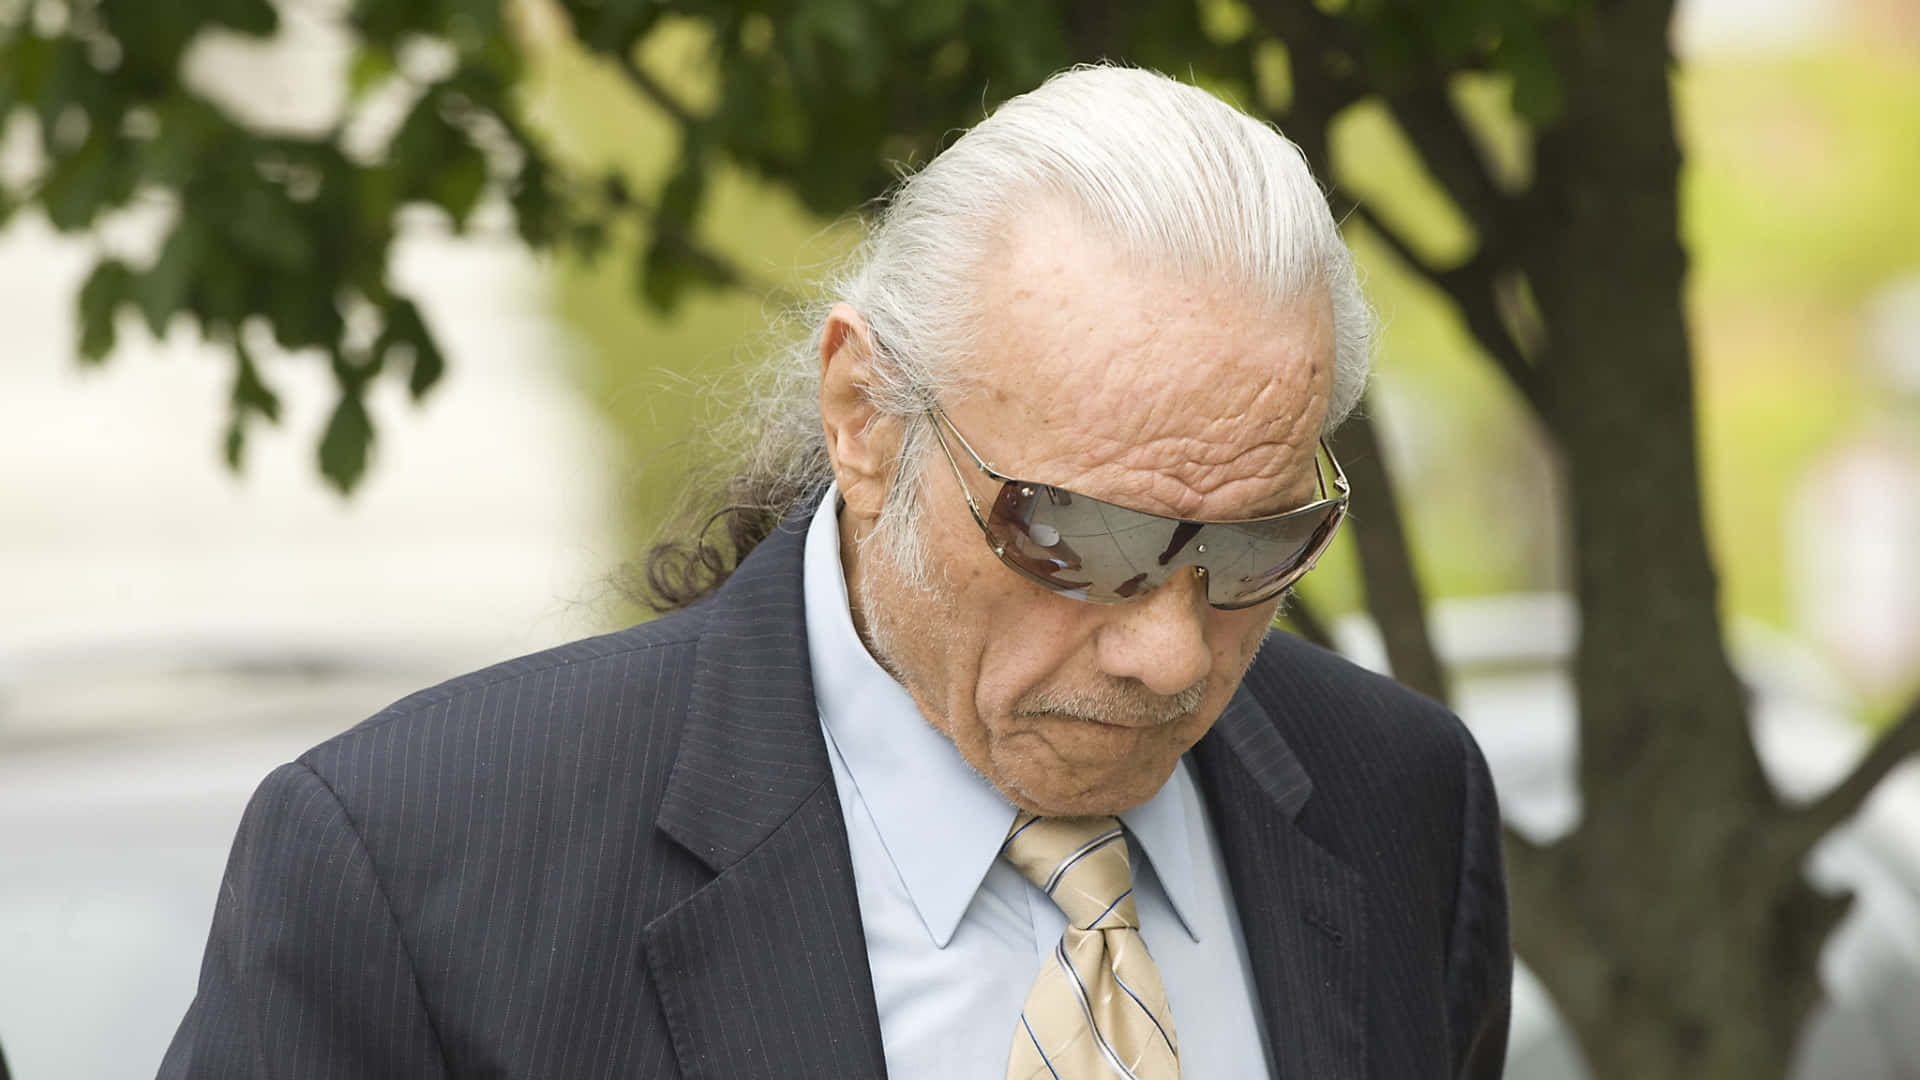 Old Jimmy Snuka Wearing Cool Shades Wallpaper